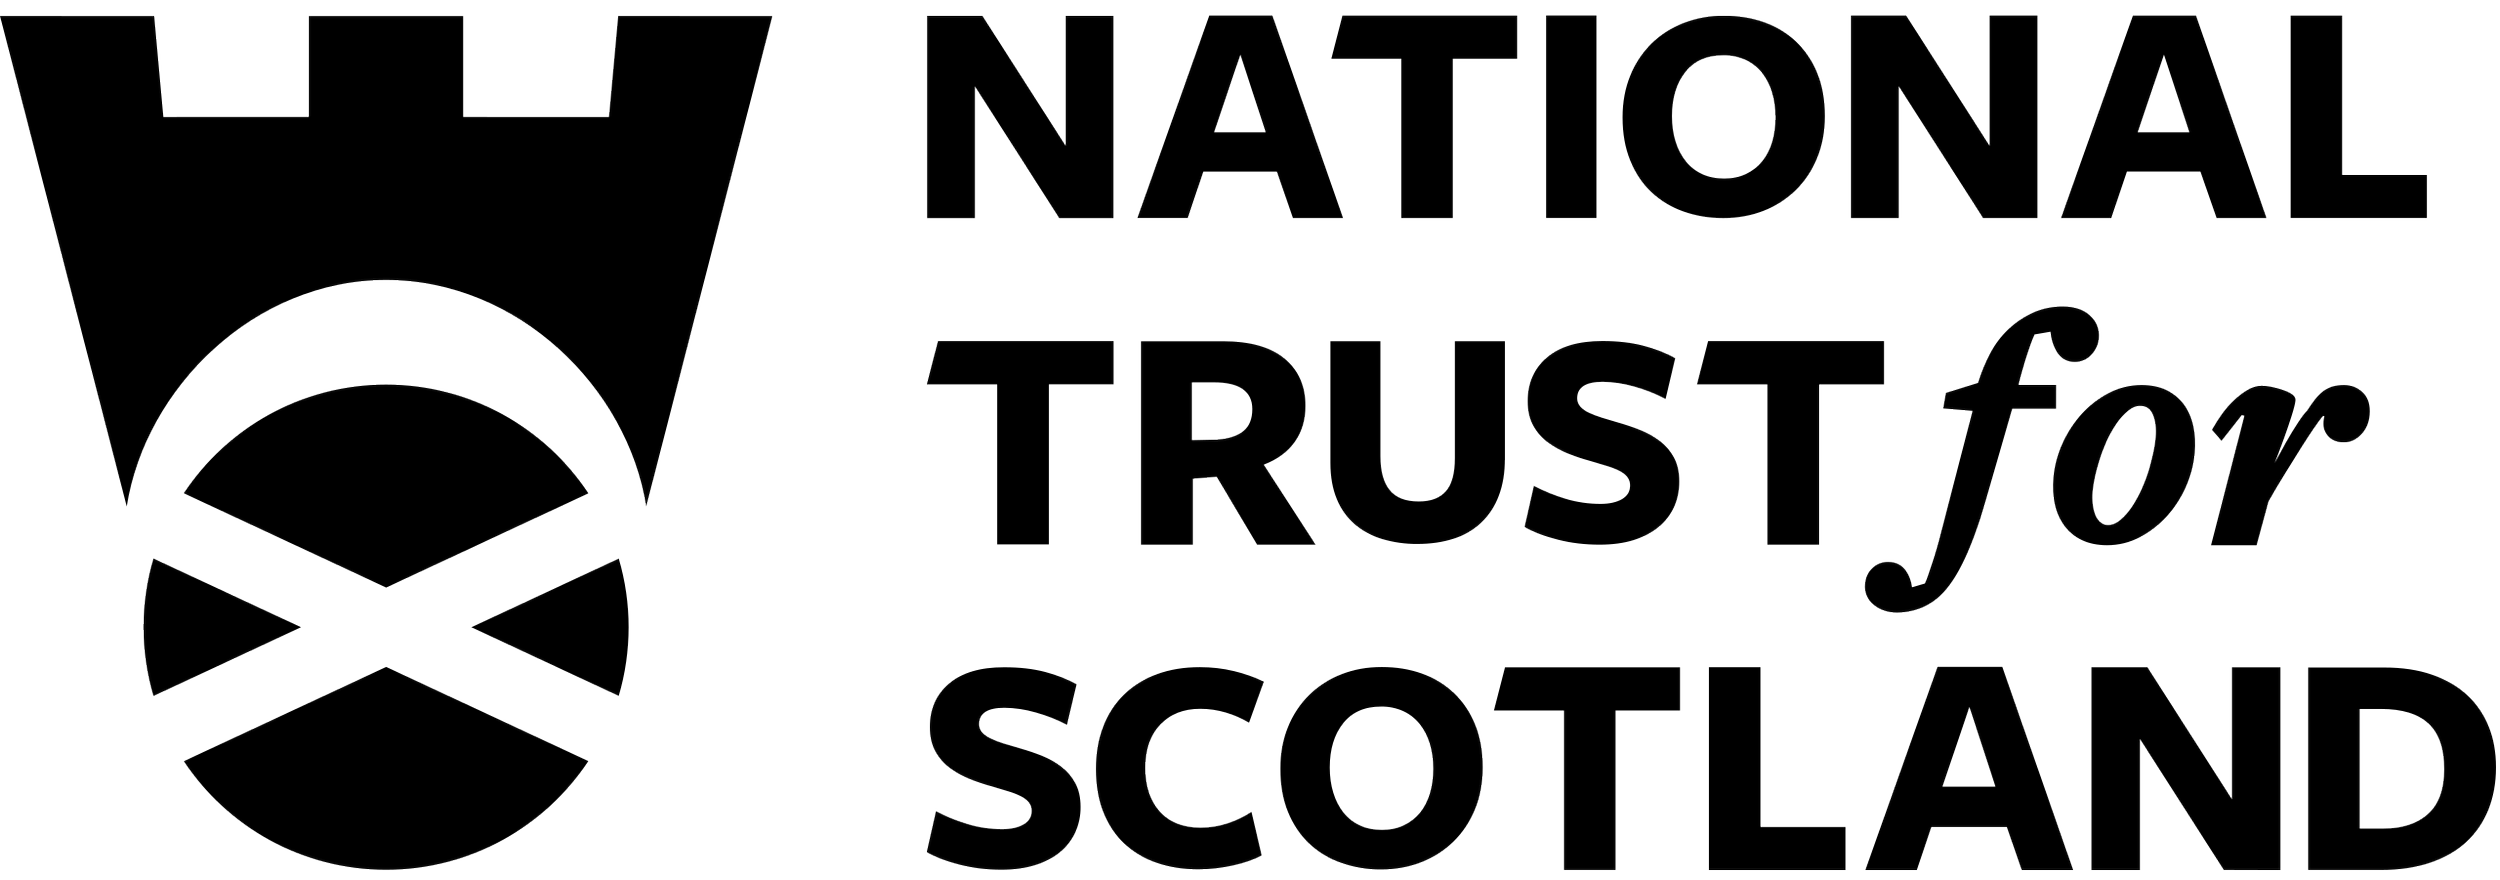 National-Trust-For-Scotland.png